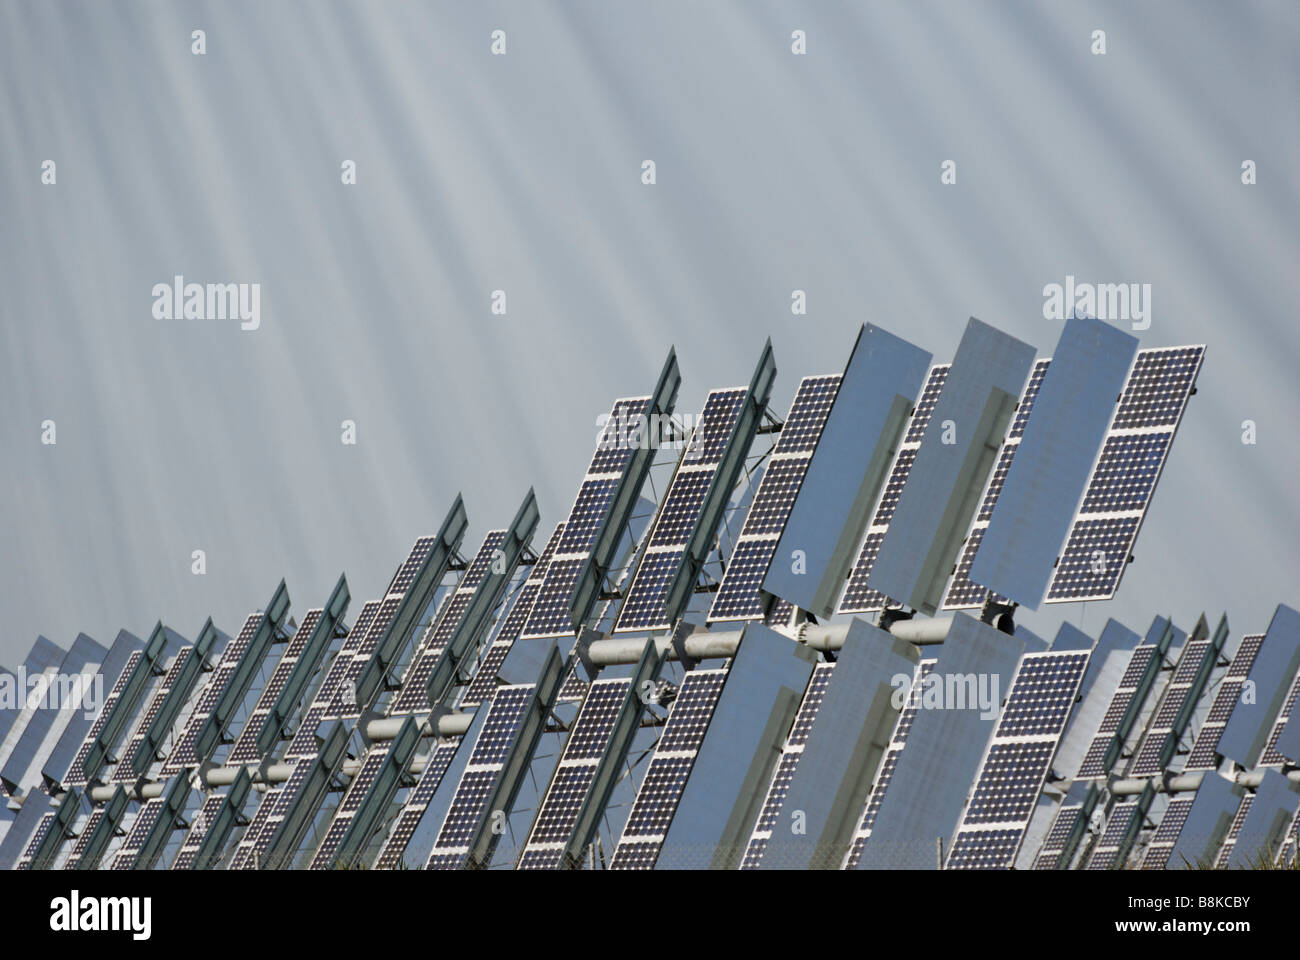 Solúcar power plant photovoltaic PV concentration tracker units which produce clean from the sun Solúcar Abengoa platform Spain Stock Photo